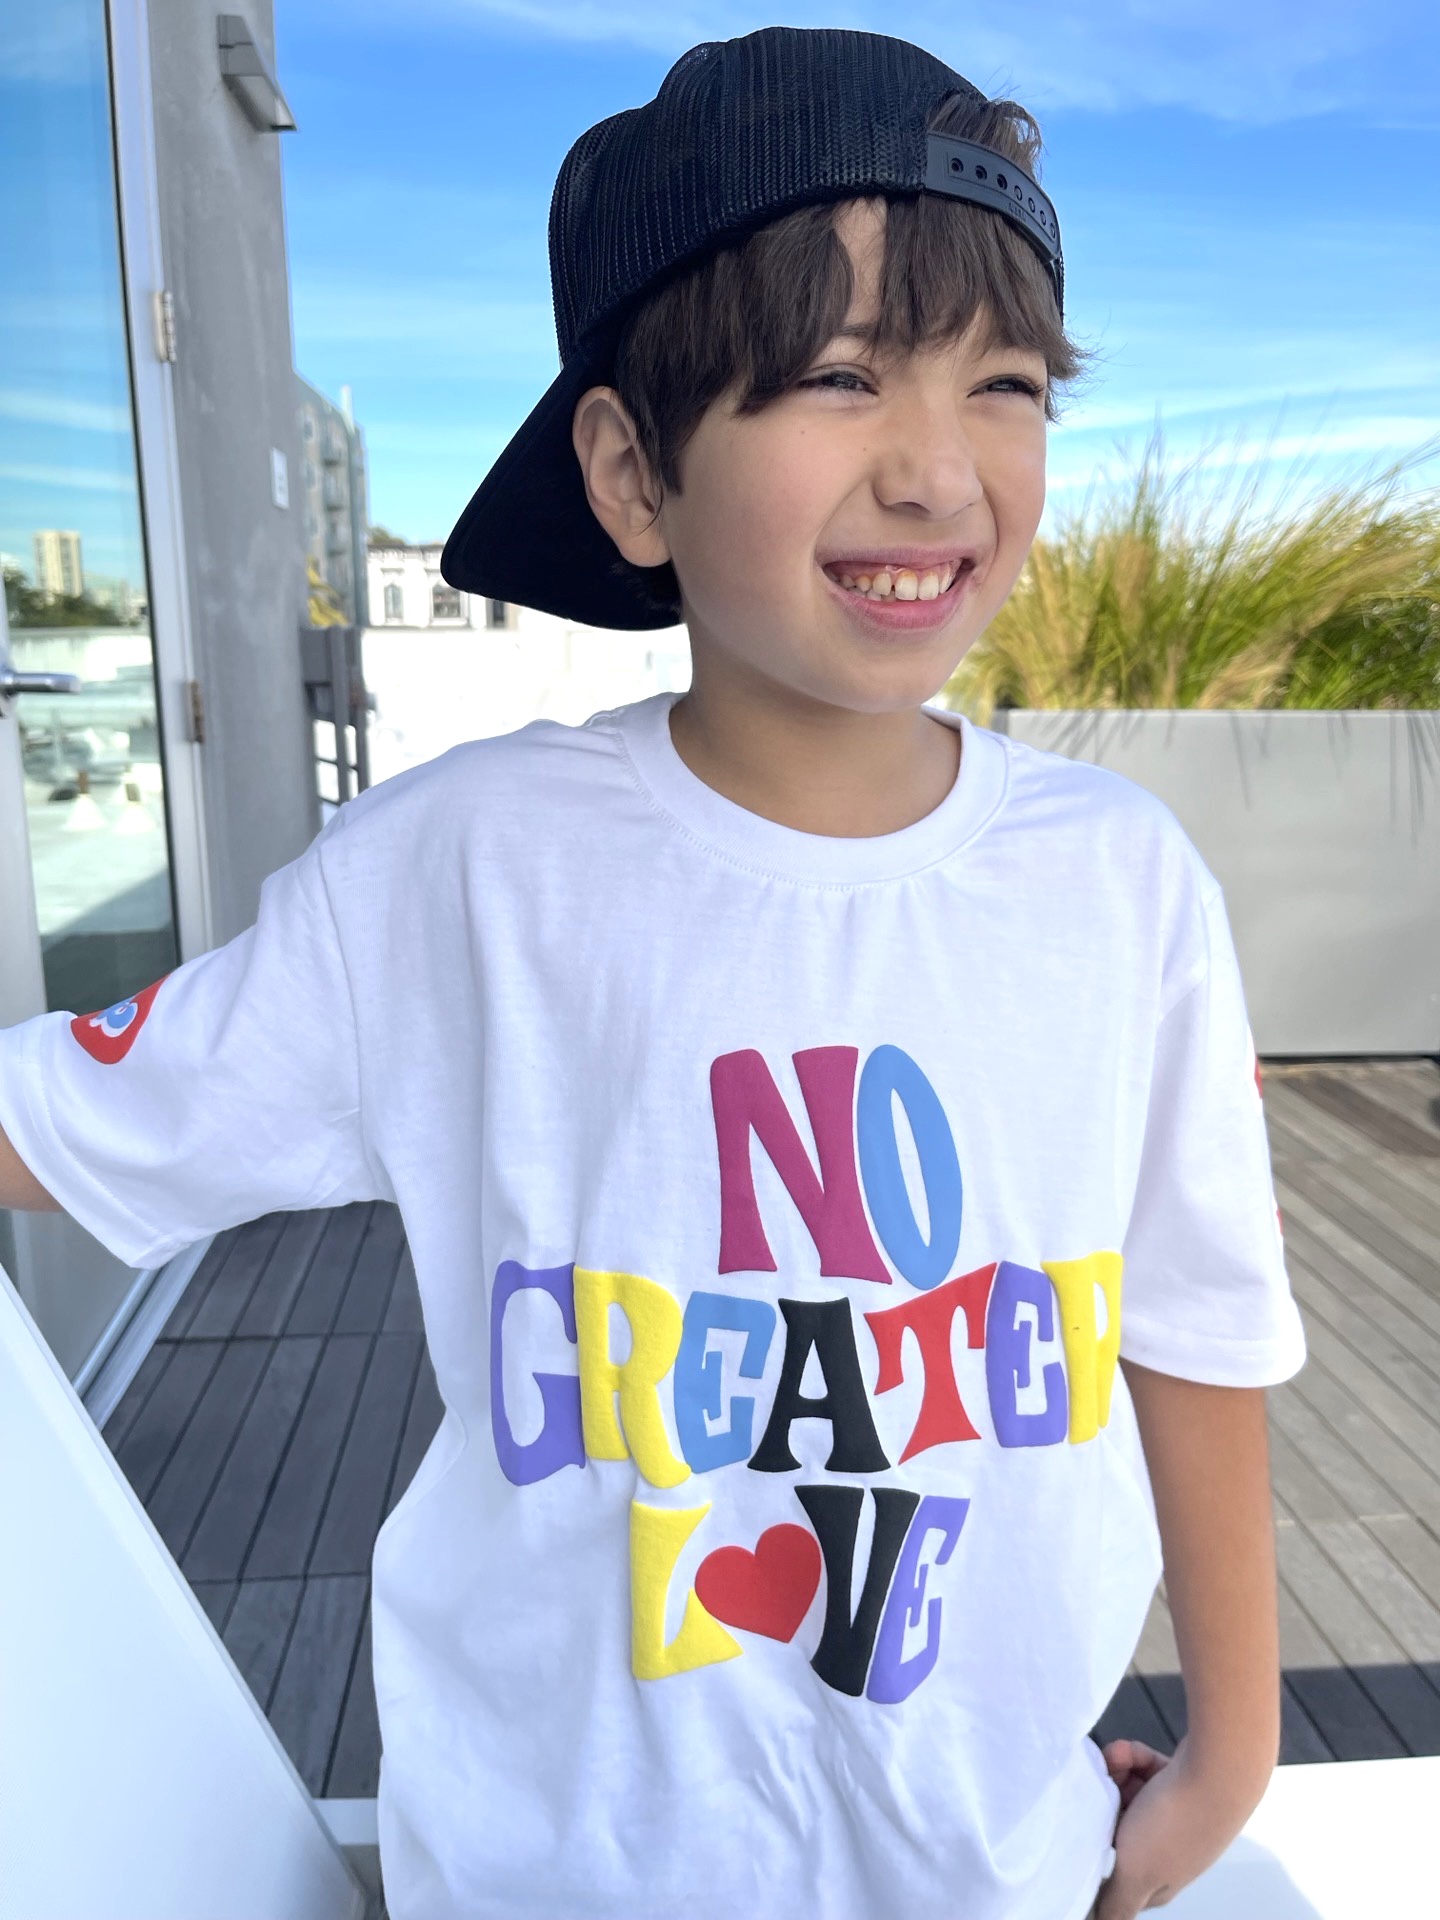 “No Greater Love” Puffy Tee – I am third culture clothing